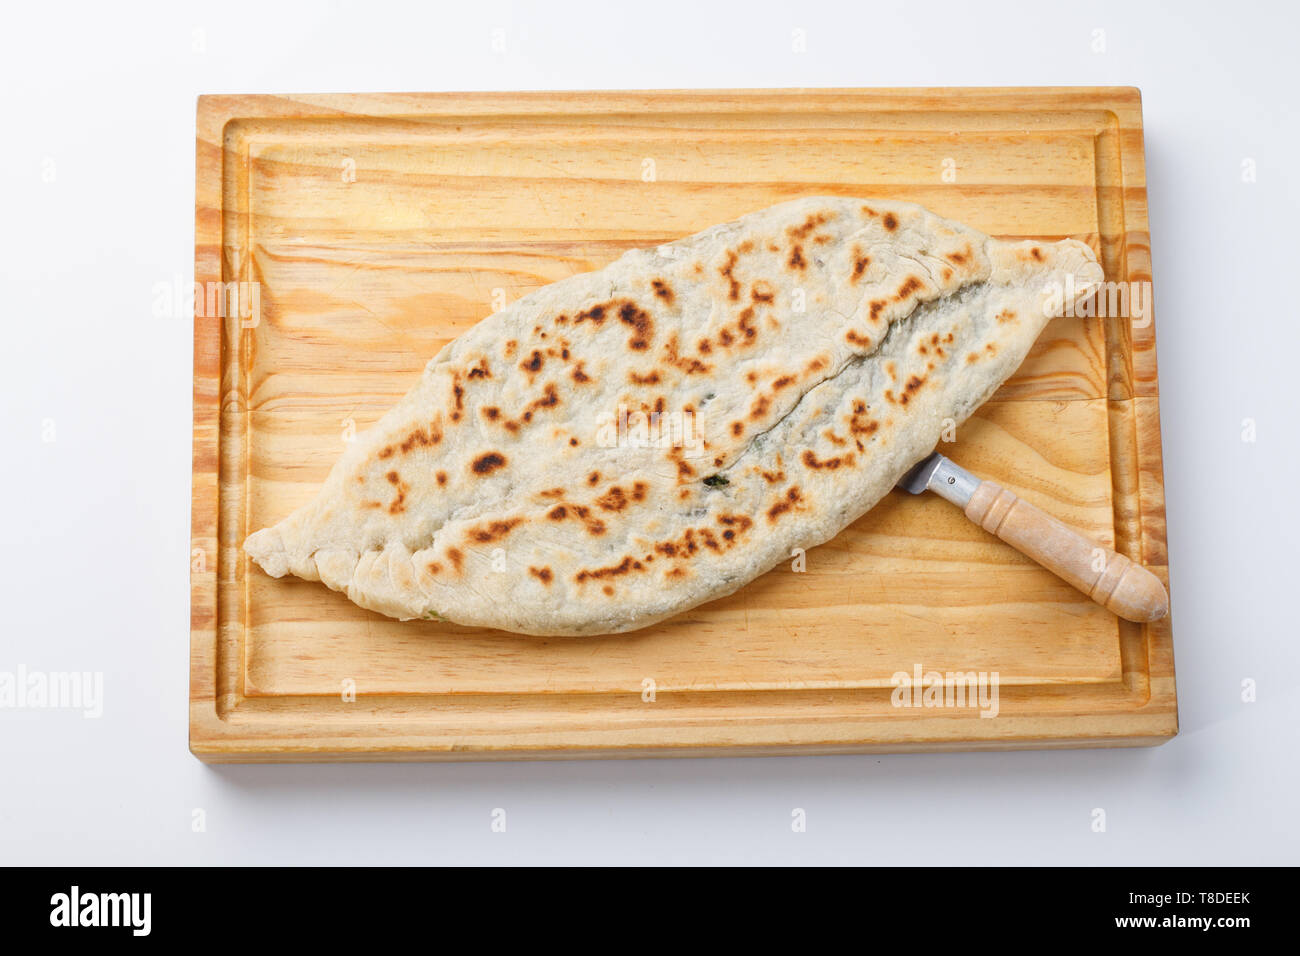 Freshly made Jingalov / Zhingyalov Hats; a traditional Armenian dish served on a wooden board, on a white background. Stock Photo